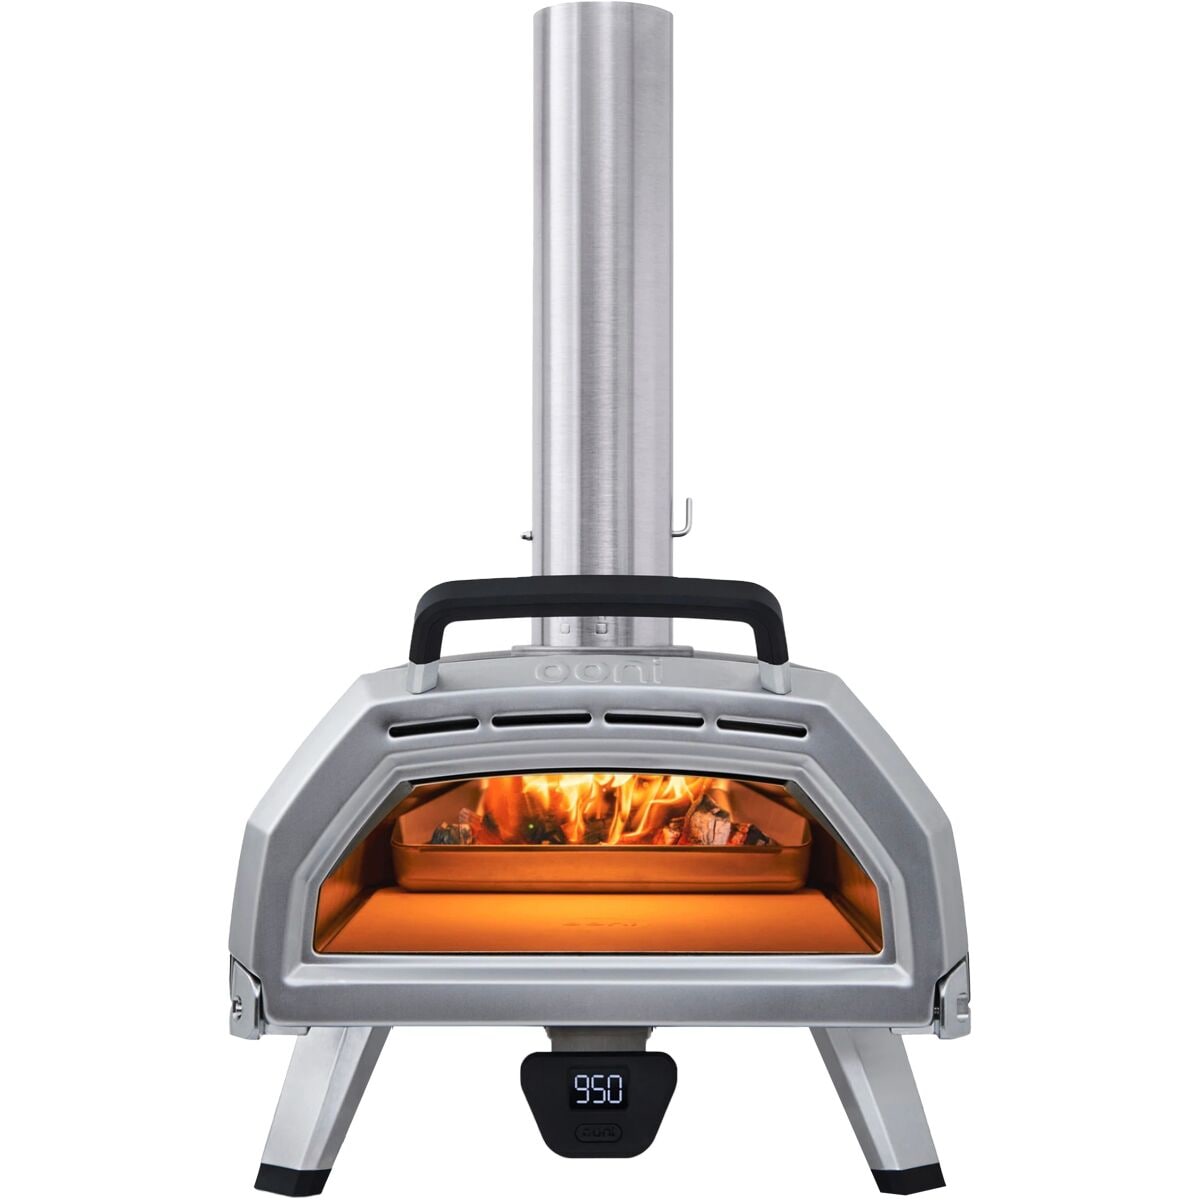 Ooni Karu 12 Pizza Oven Review - Girls Can Grill